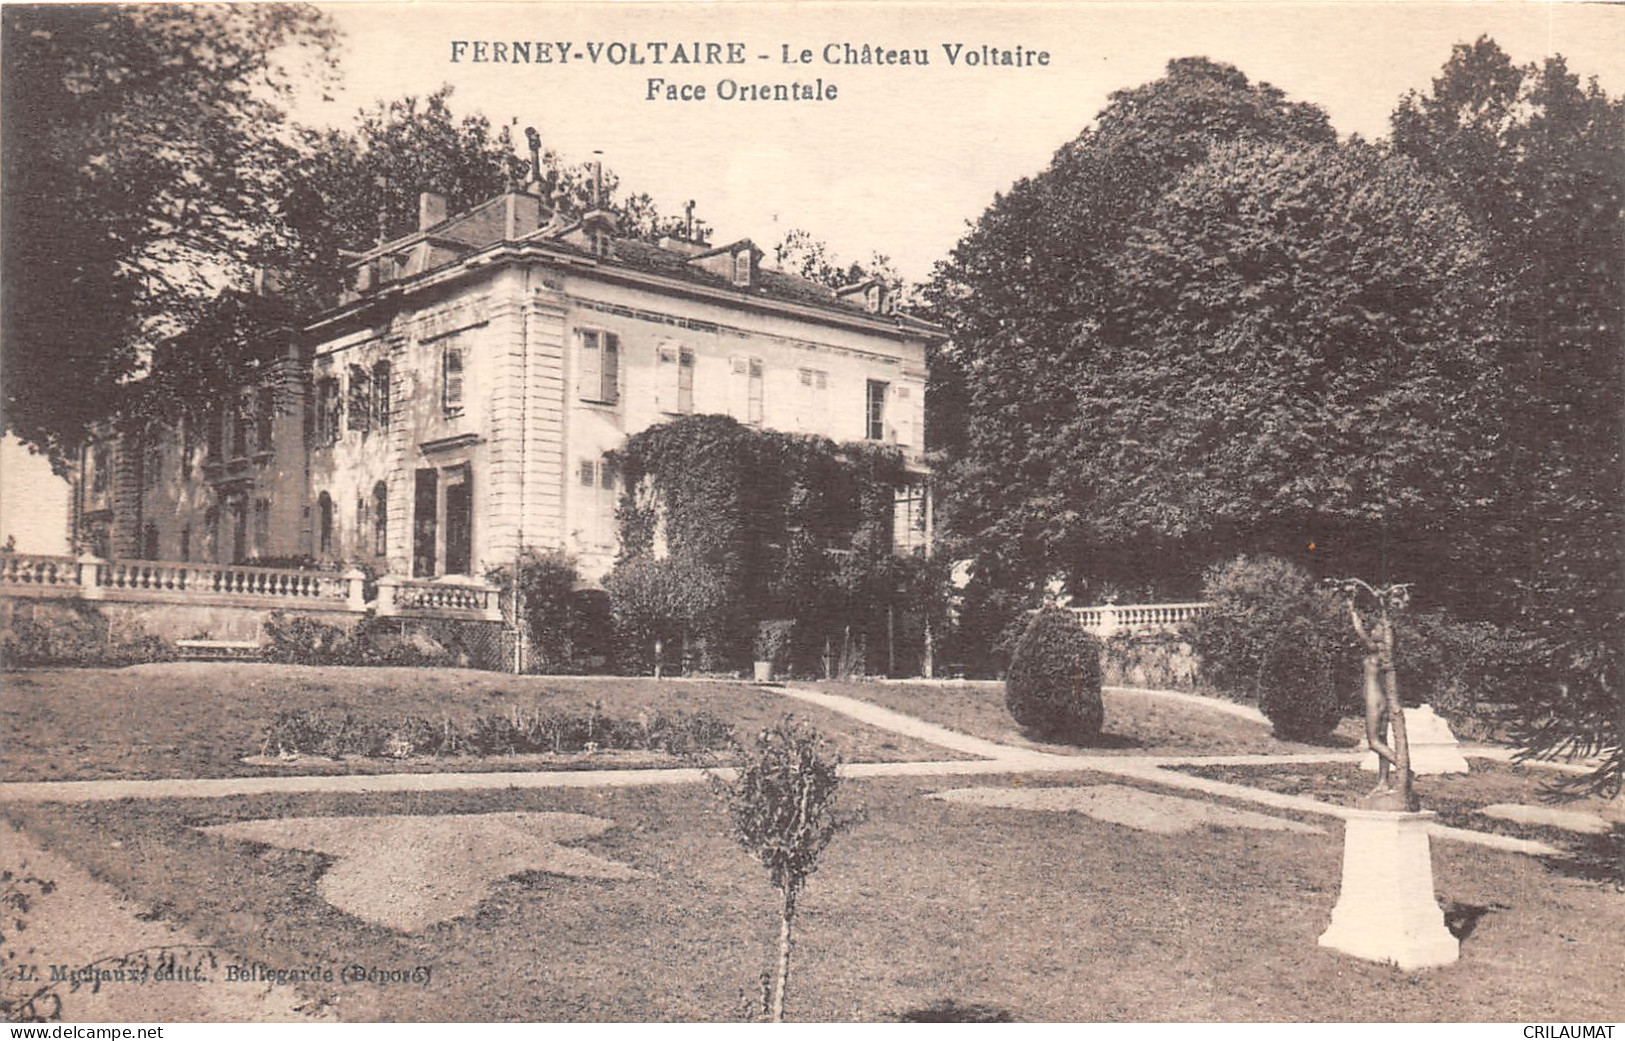 01-FERNEY VOLTAIRE-CHATEAU VOLTAIRE-N 6008-B/0151 - Ferney-Voltaire